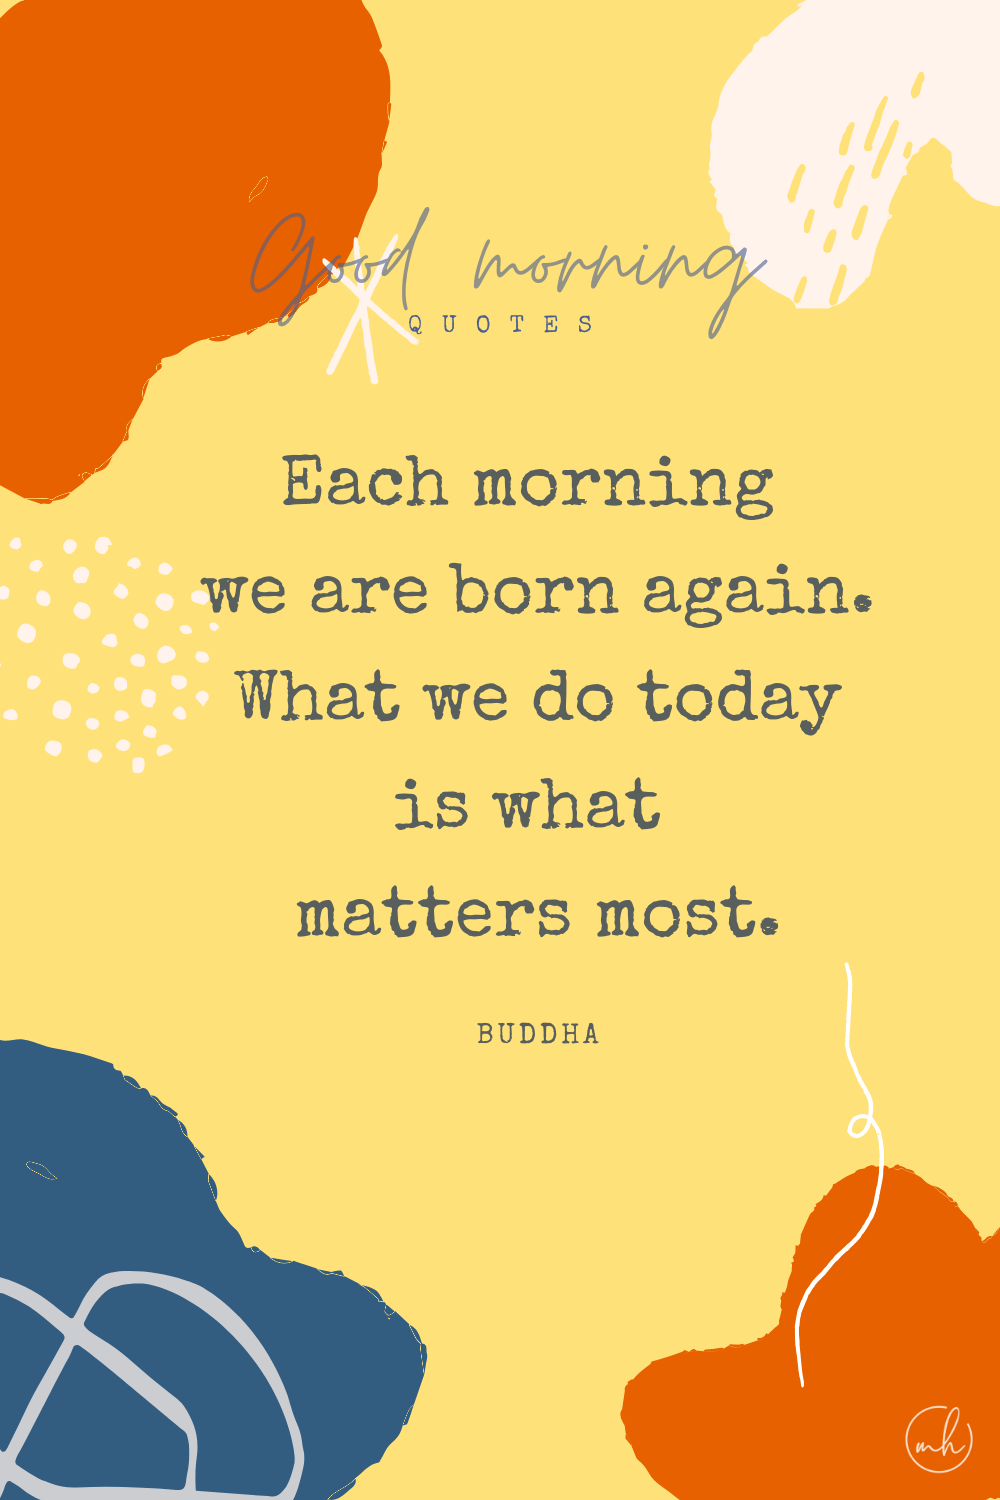 "Each morning we are born again. What we do today is what matters most." – Buddha